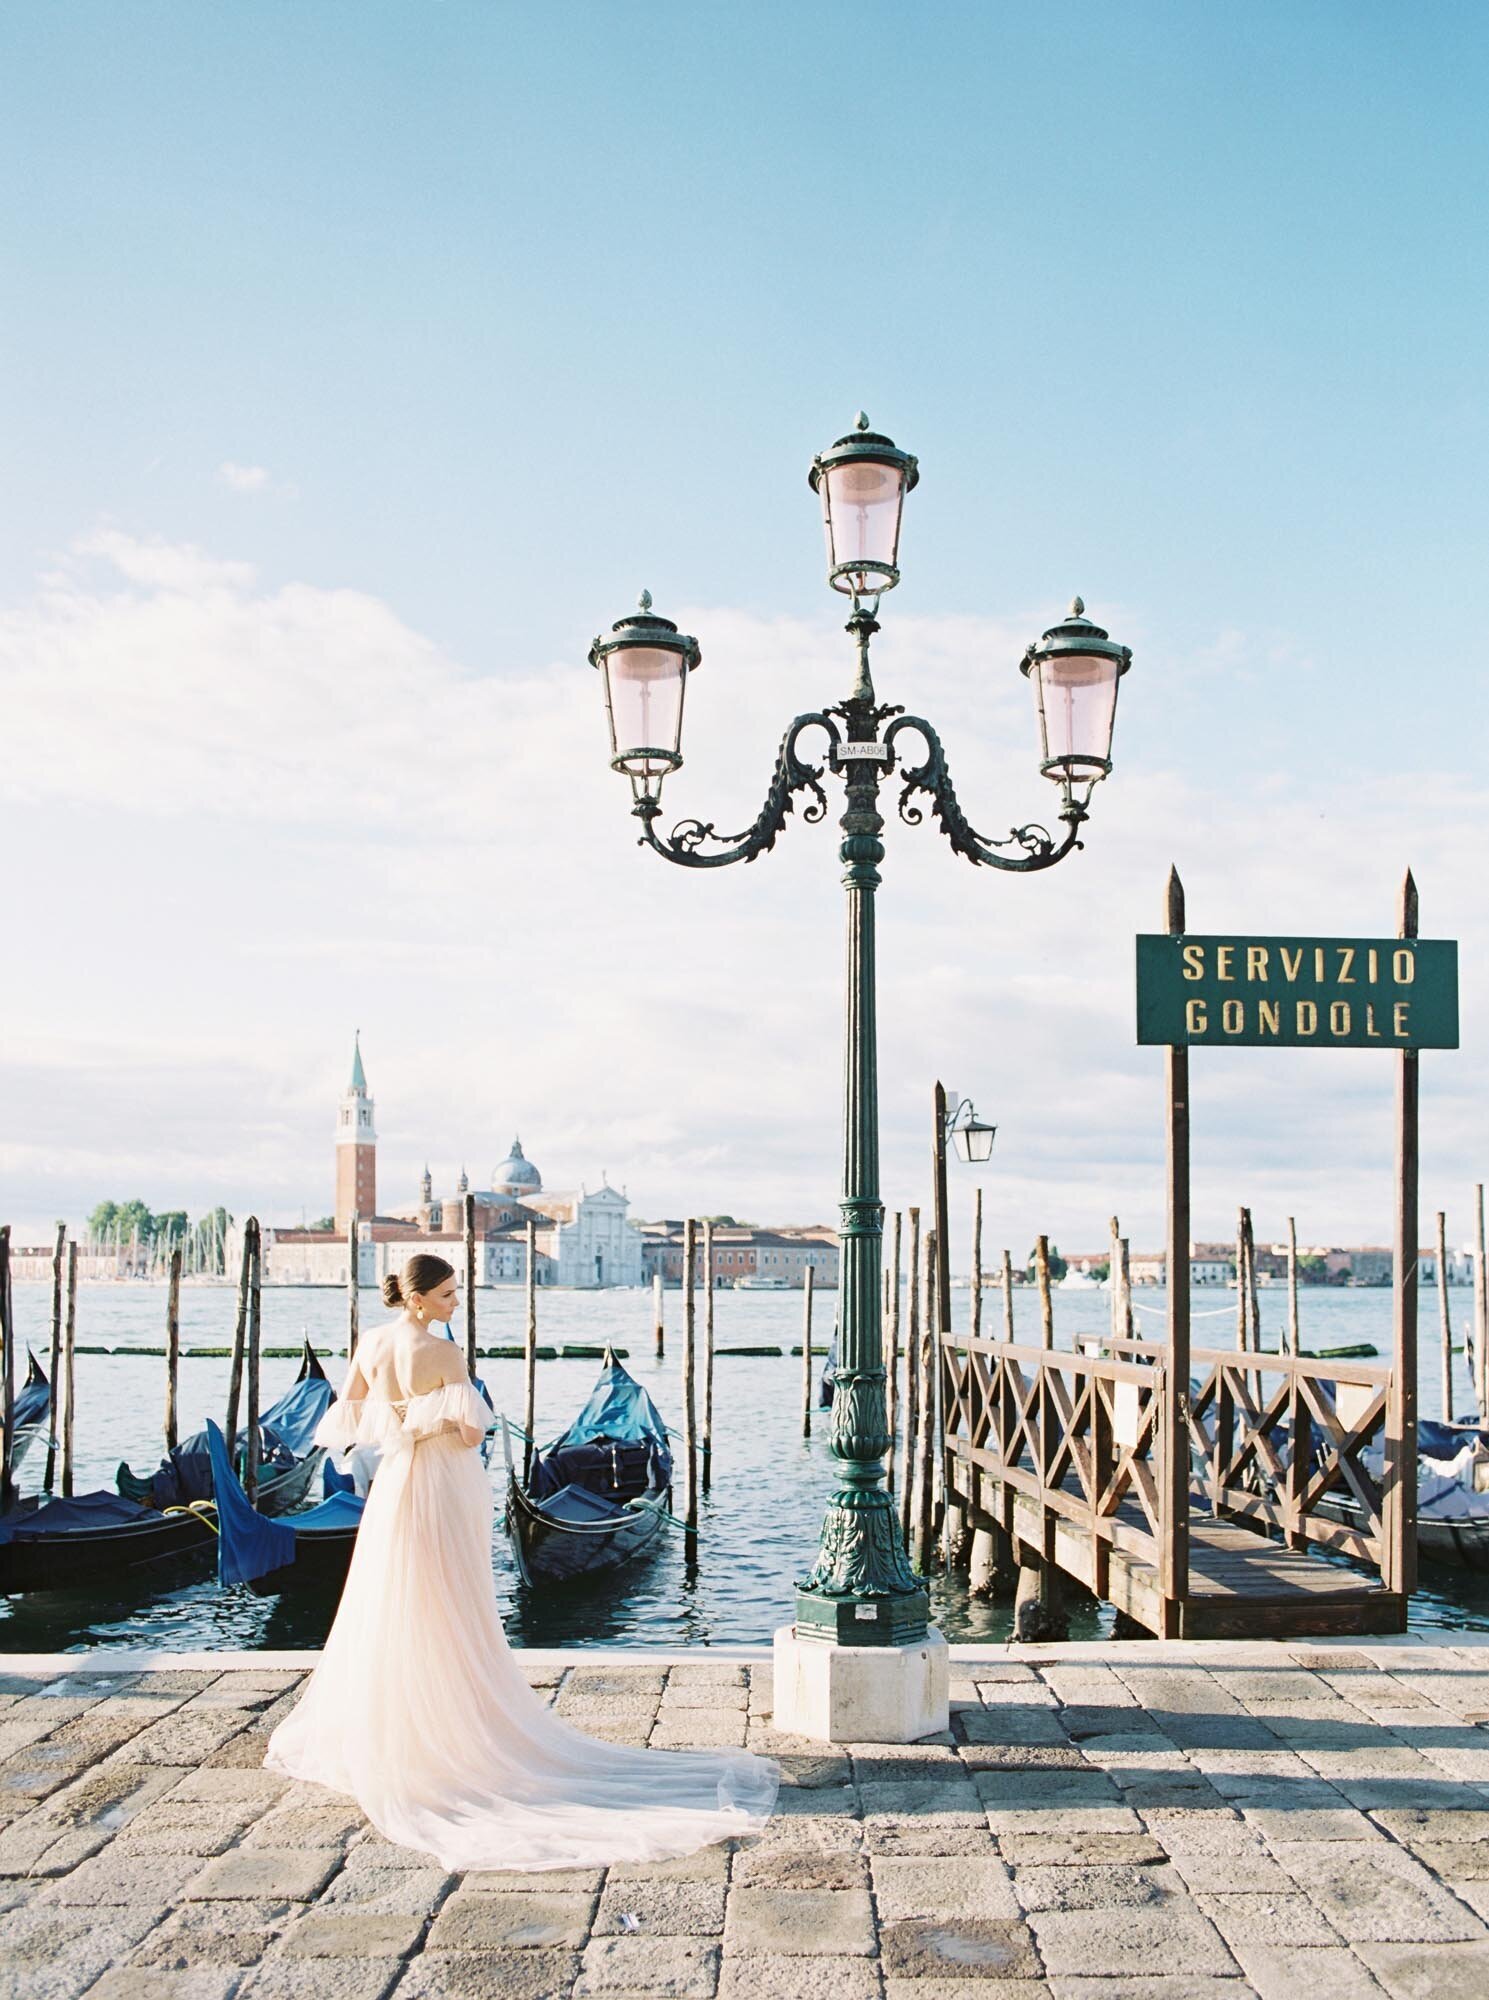 Bride at the Venice harbour